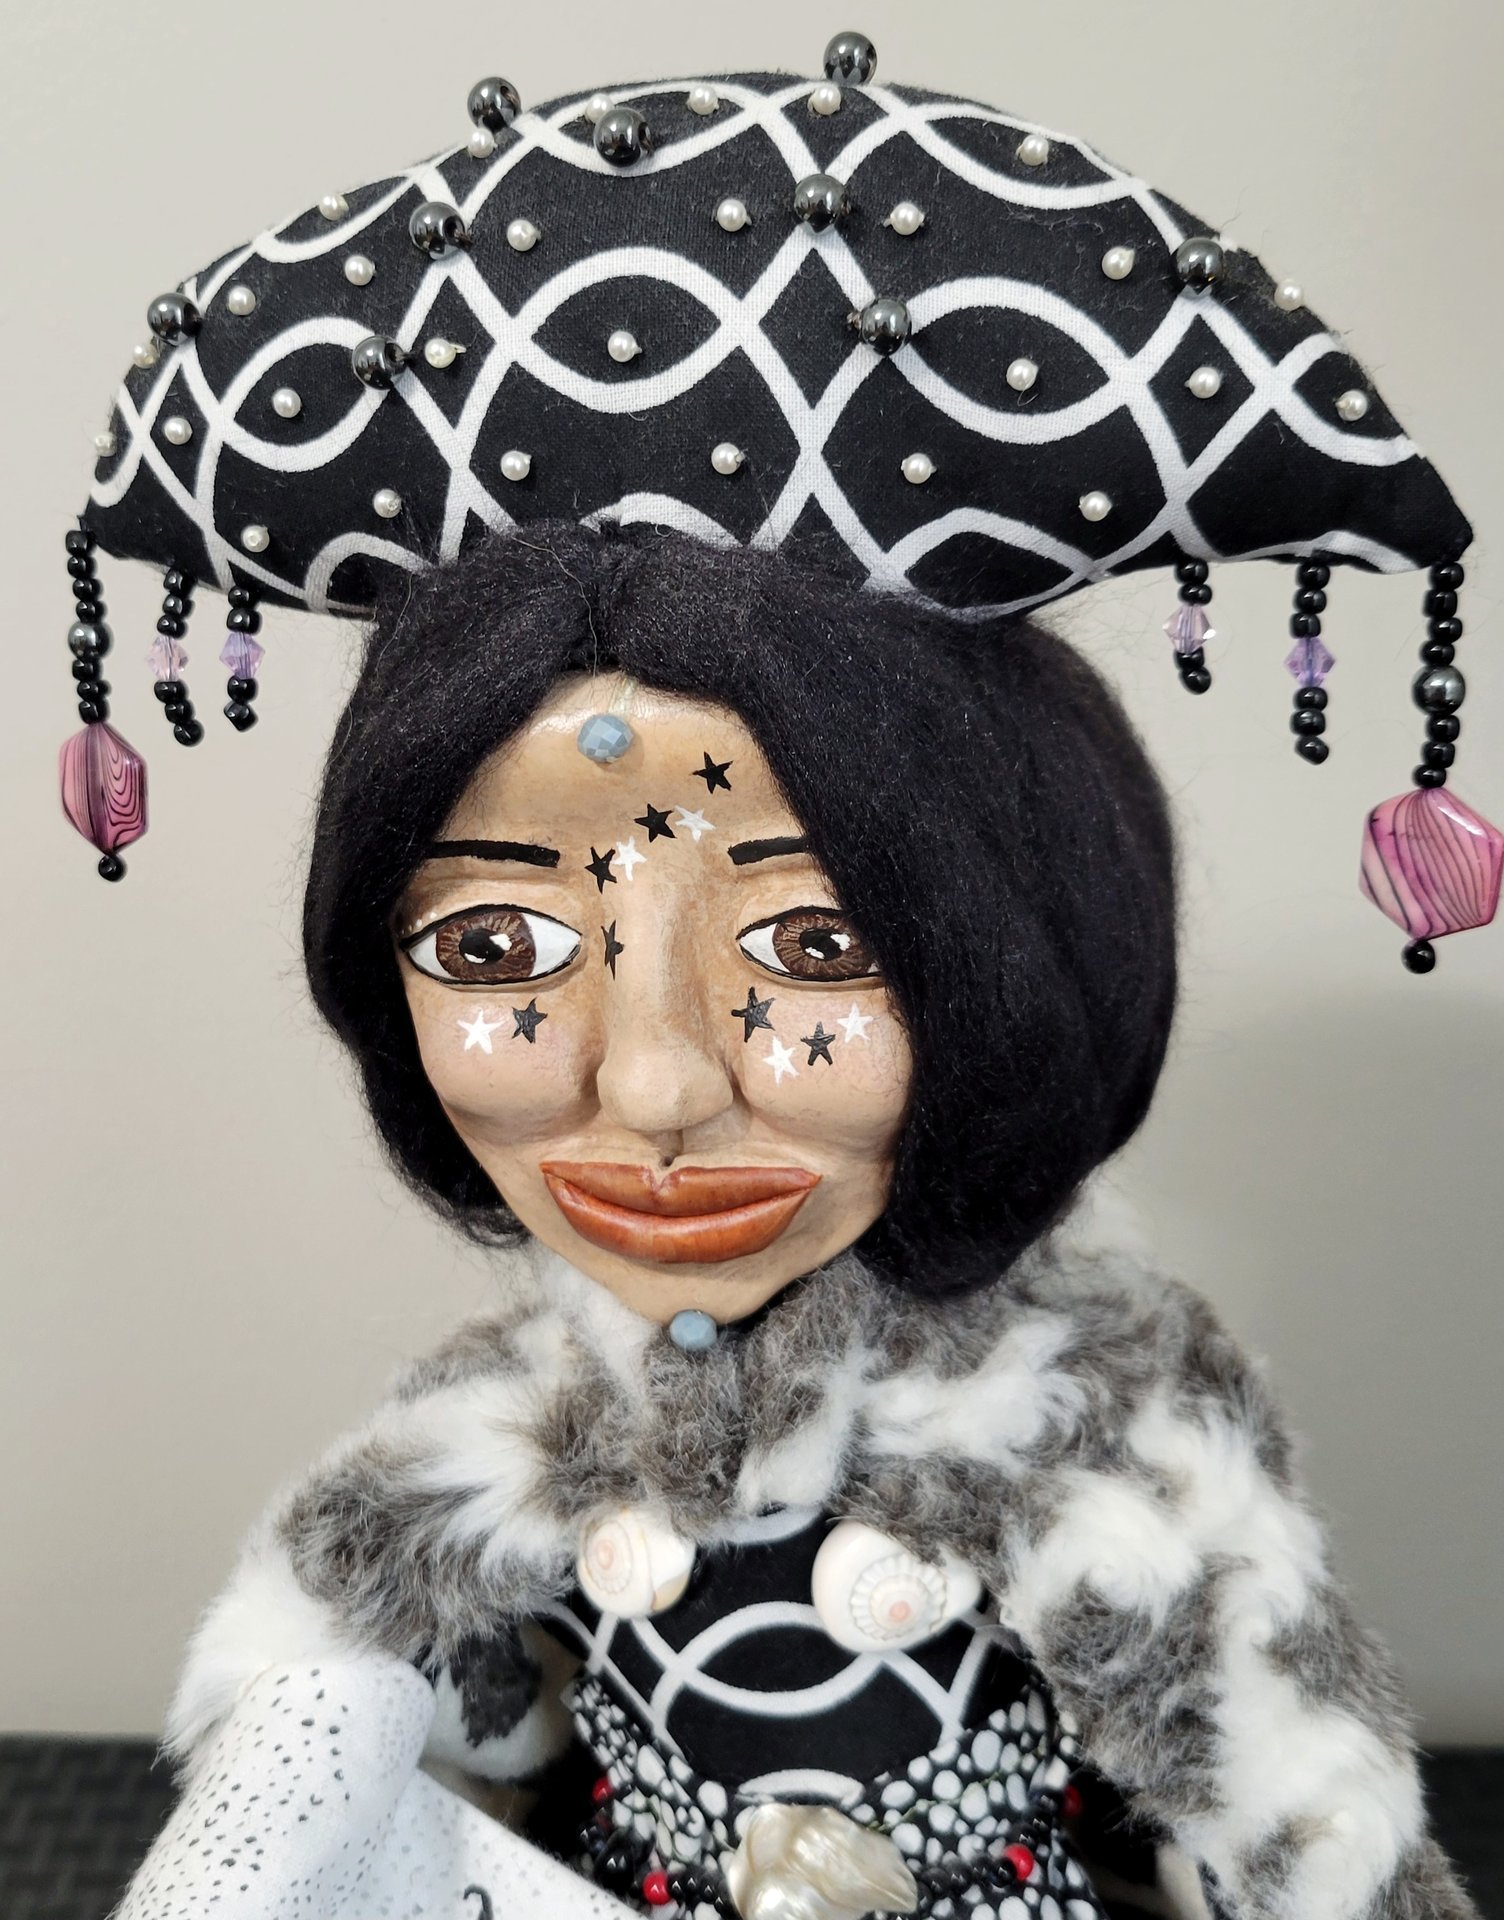 Own your Power - OOAK Art Doll for Womens Empowerment